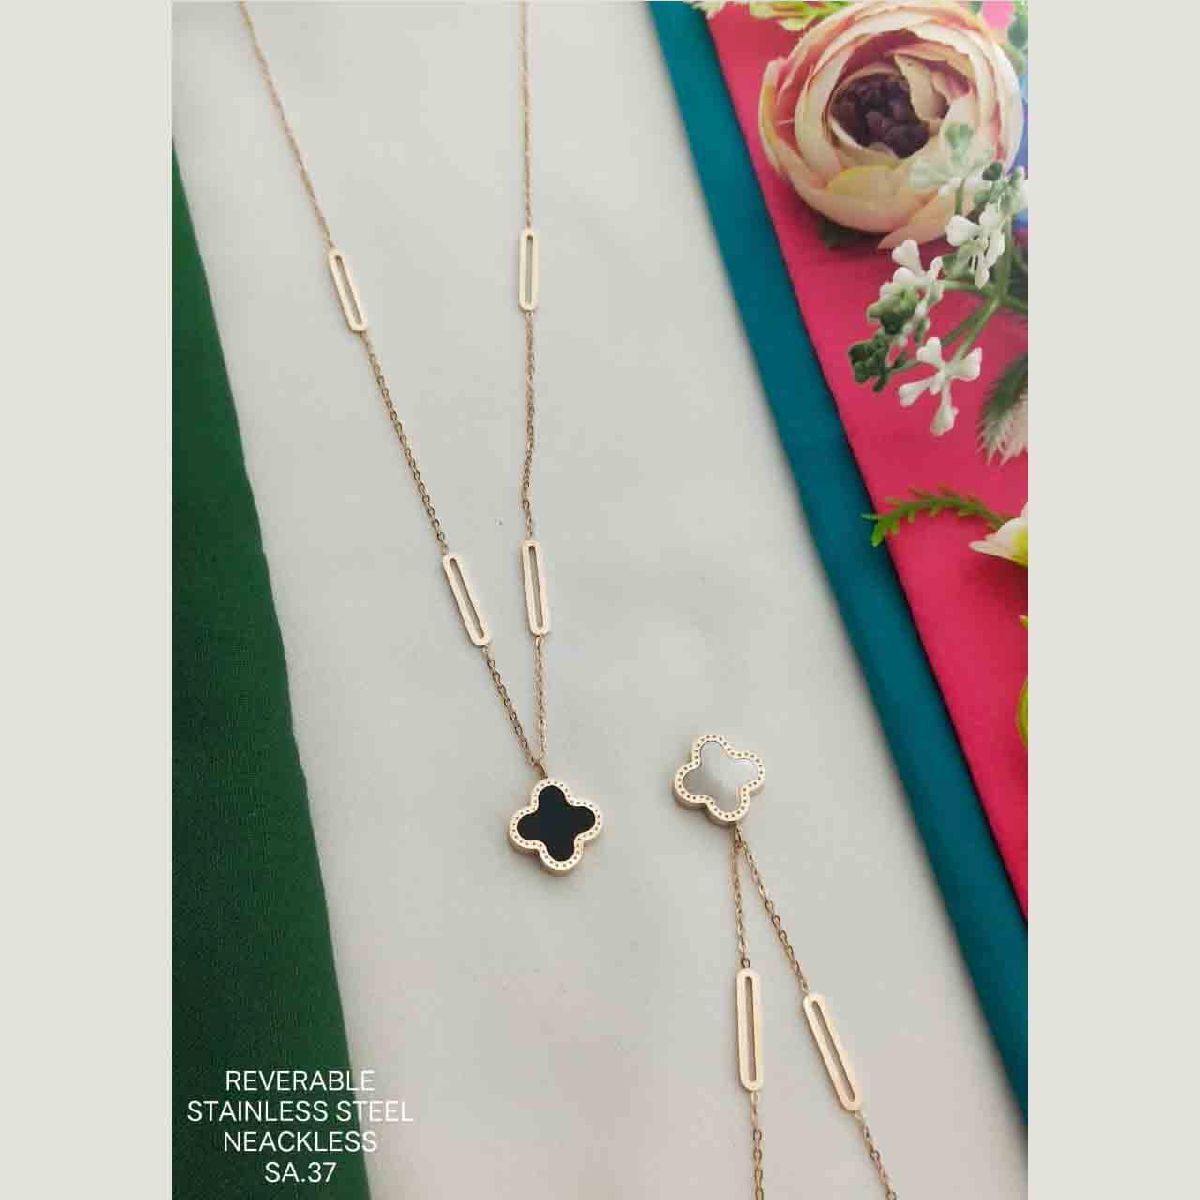 Clover Flower Dual Side Black White Rose Gold Stainless Steel Necklace Pendant Chain Women